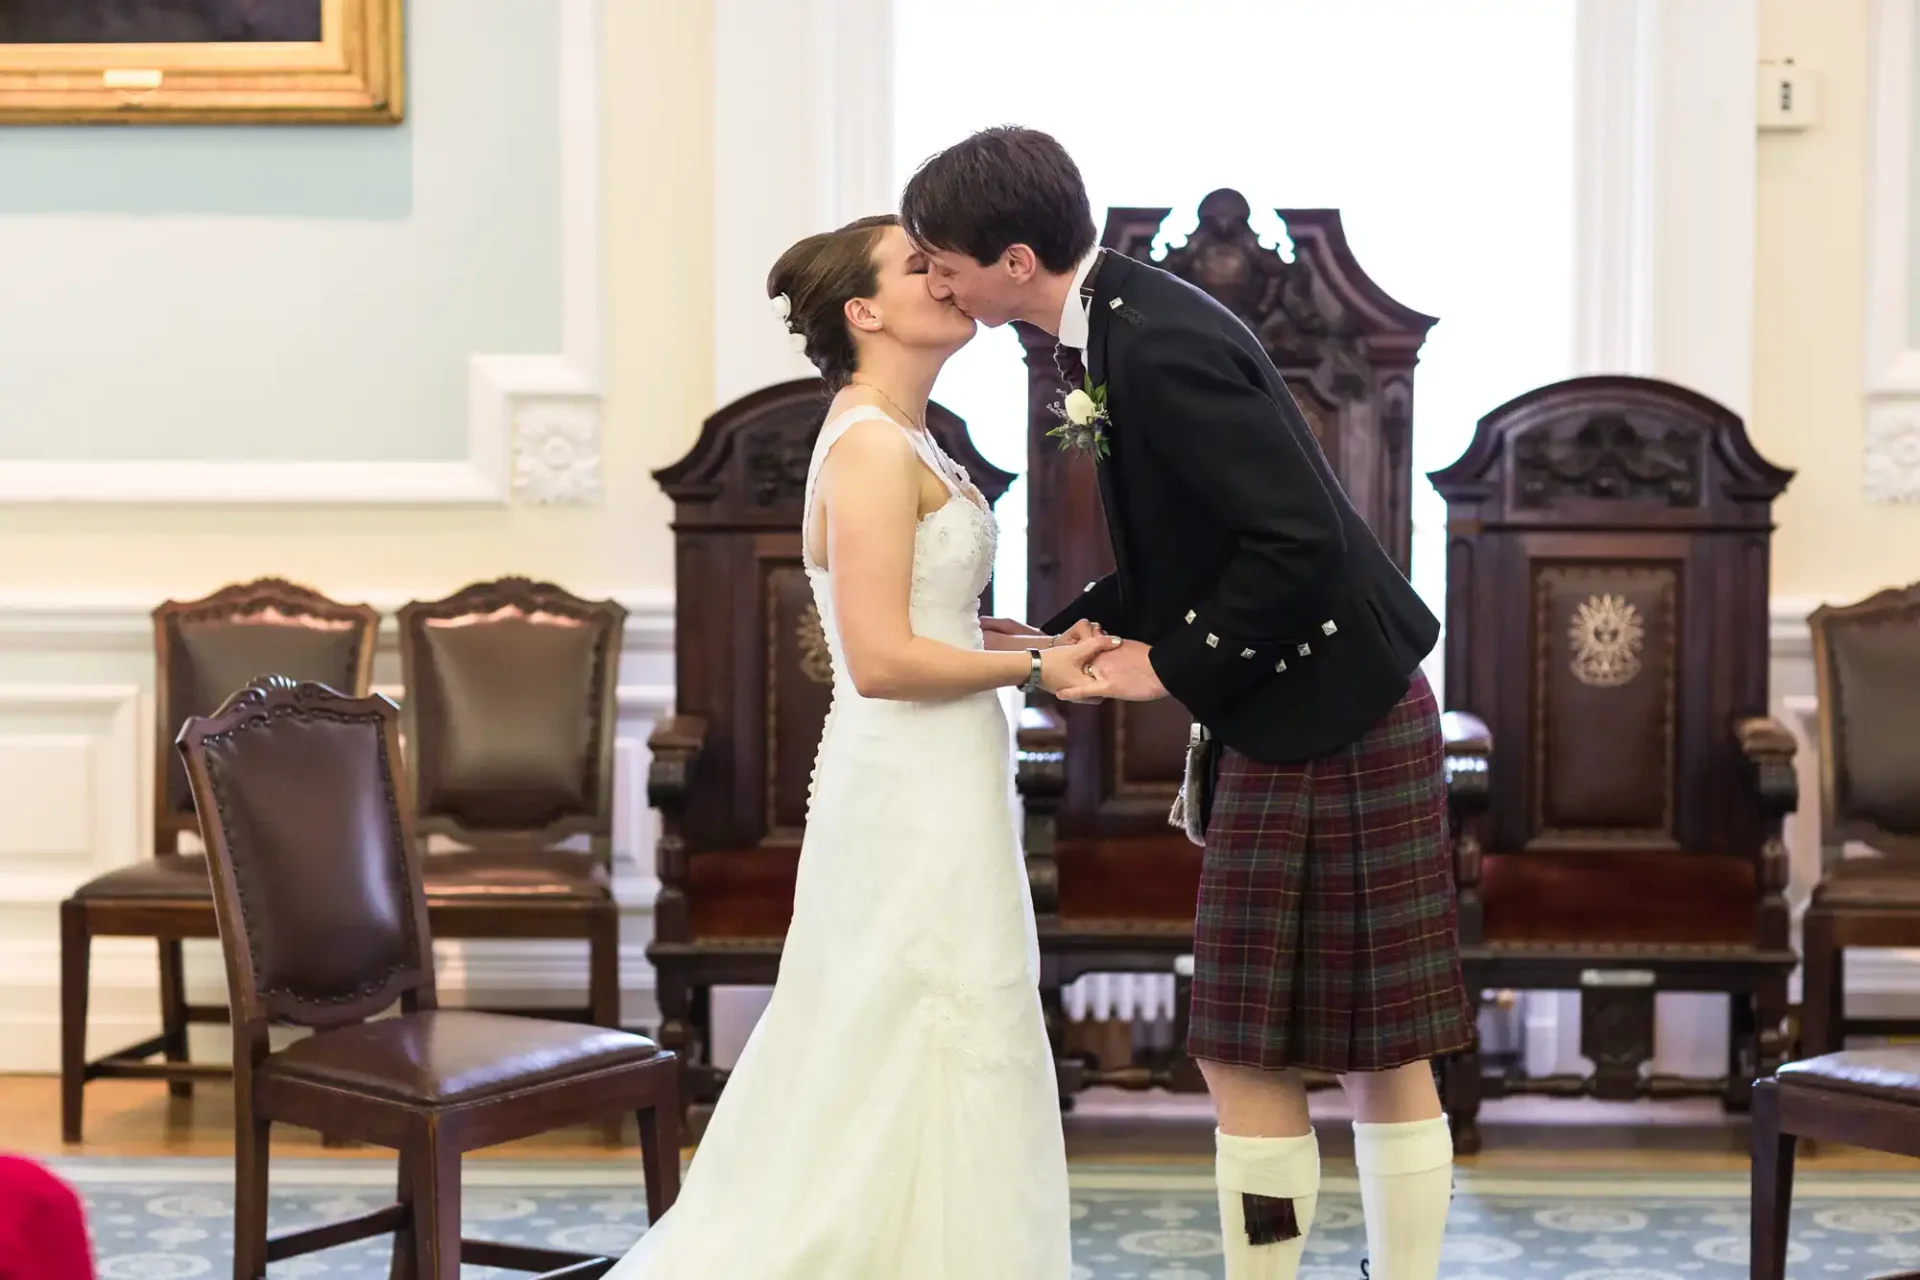 A bride and groom kiss during their wedding ceremony in an elegant room, the groom wearing a traditional kilt.